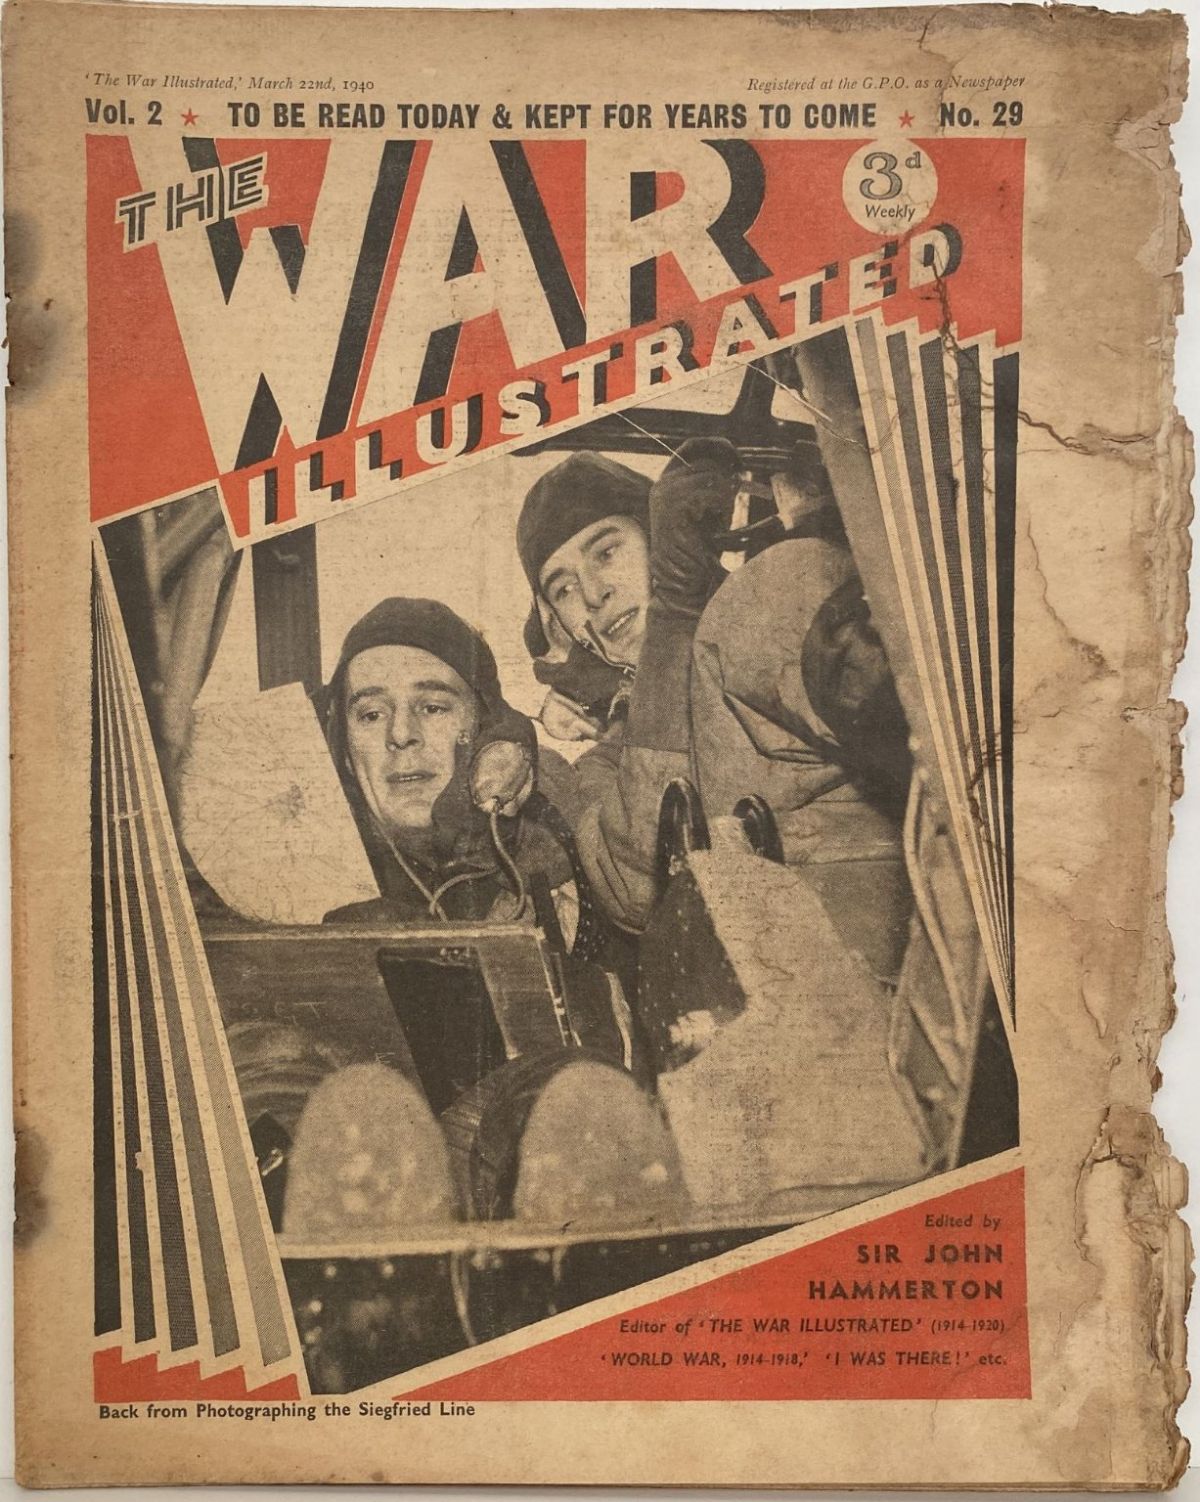 THE WAR ILLUSTRATED - Vol 2, No 29, 22nd March 1940